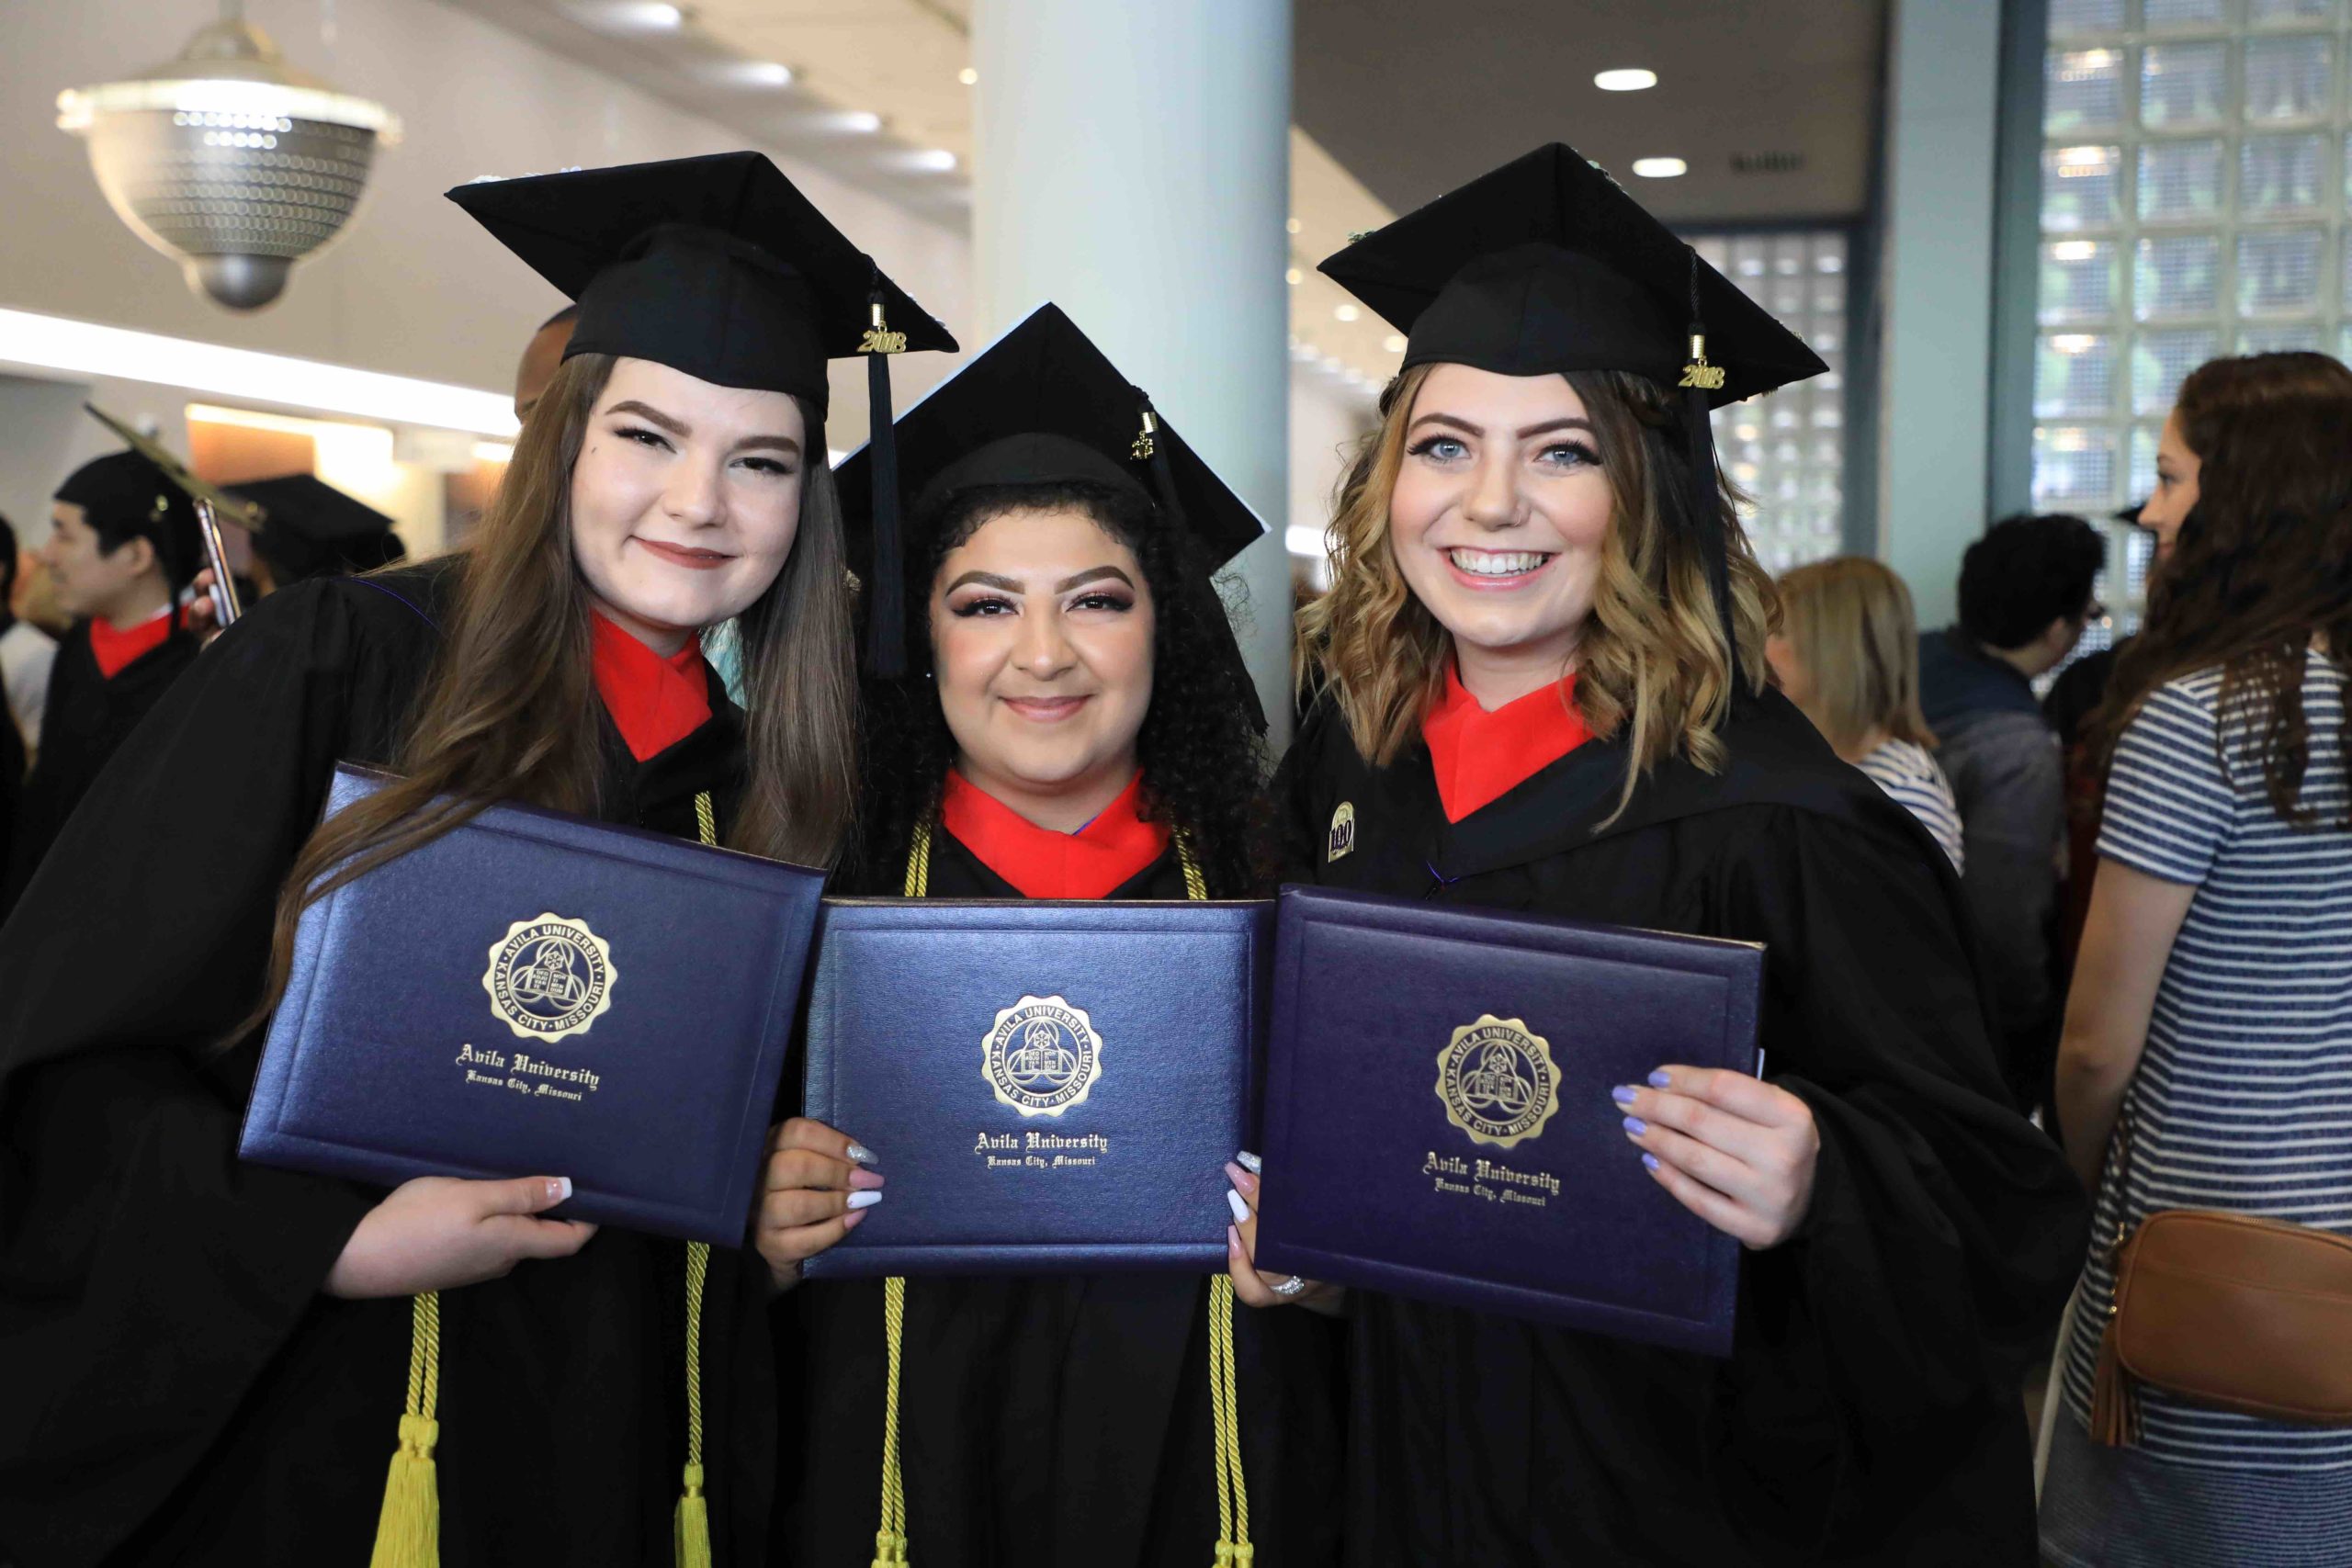 A group of three women posing with the diplomas at graduation in their caps and gowns